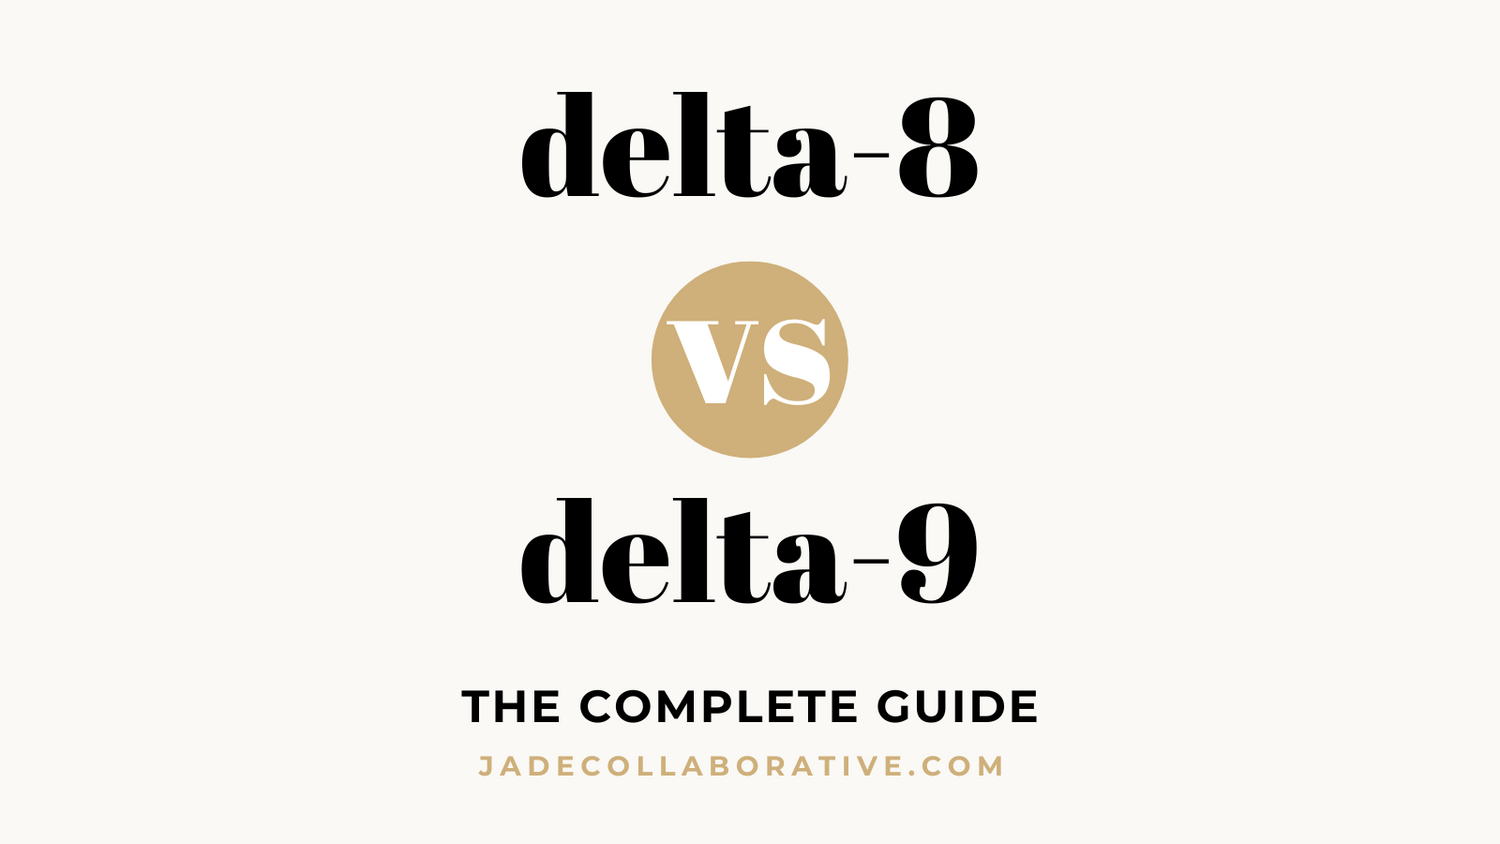 delta-8 vs delta-9 thc - what's the difference